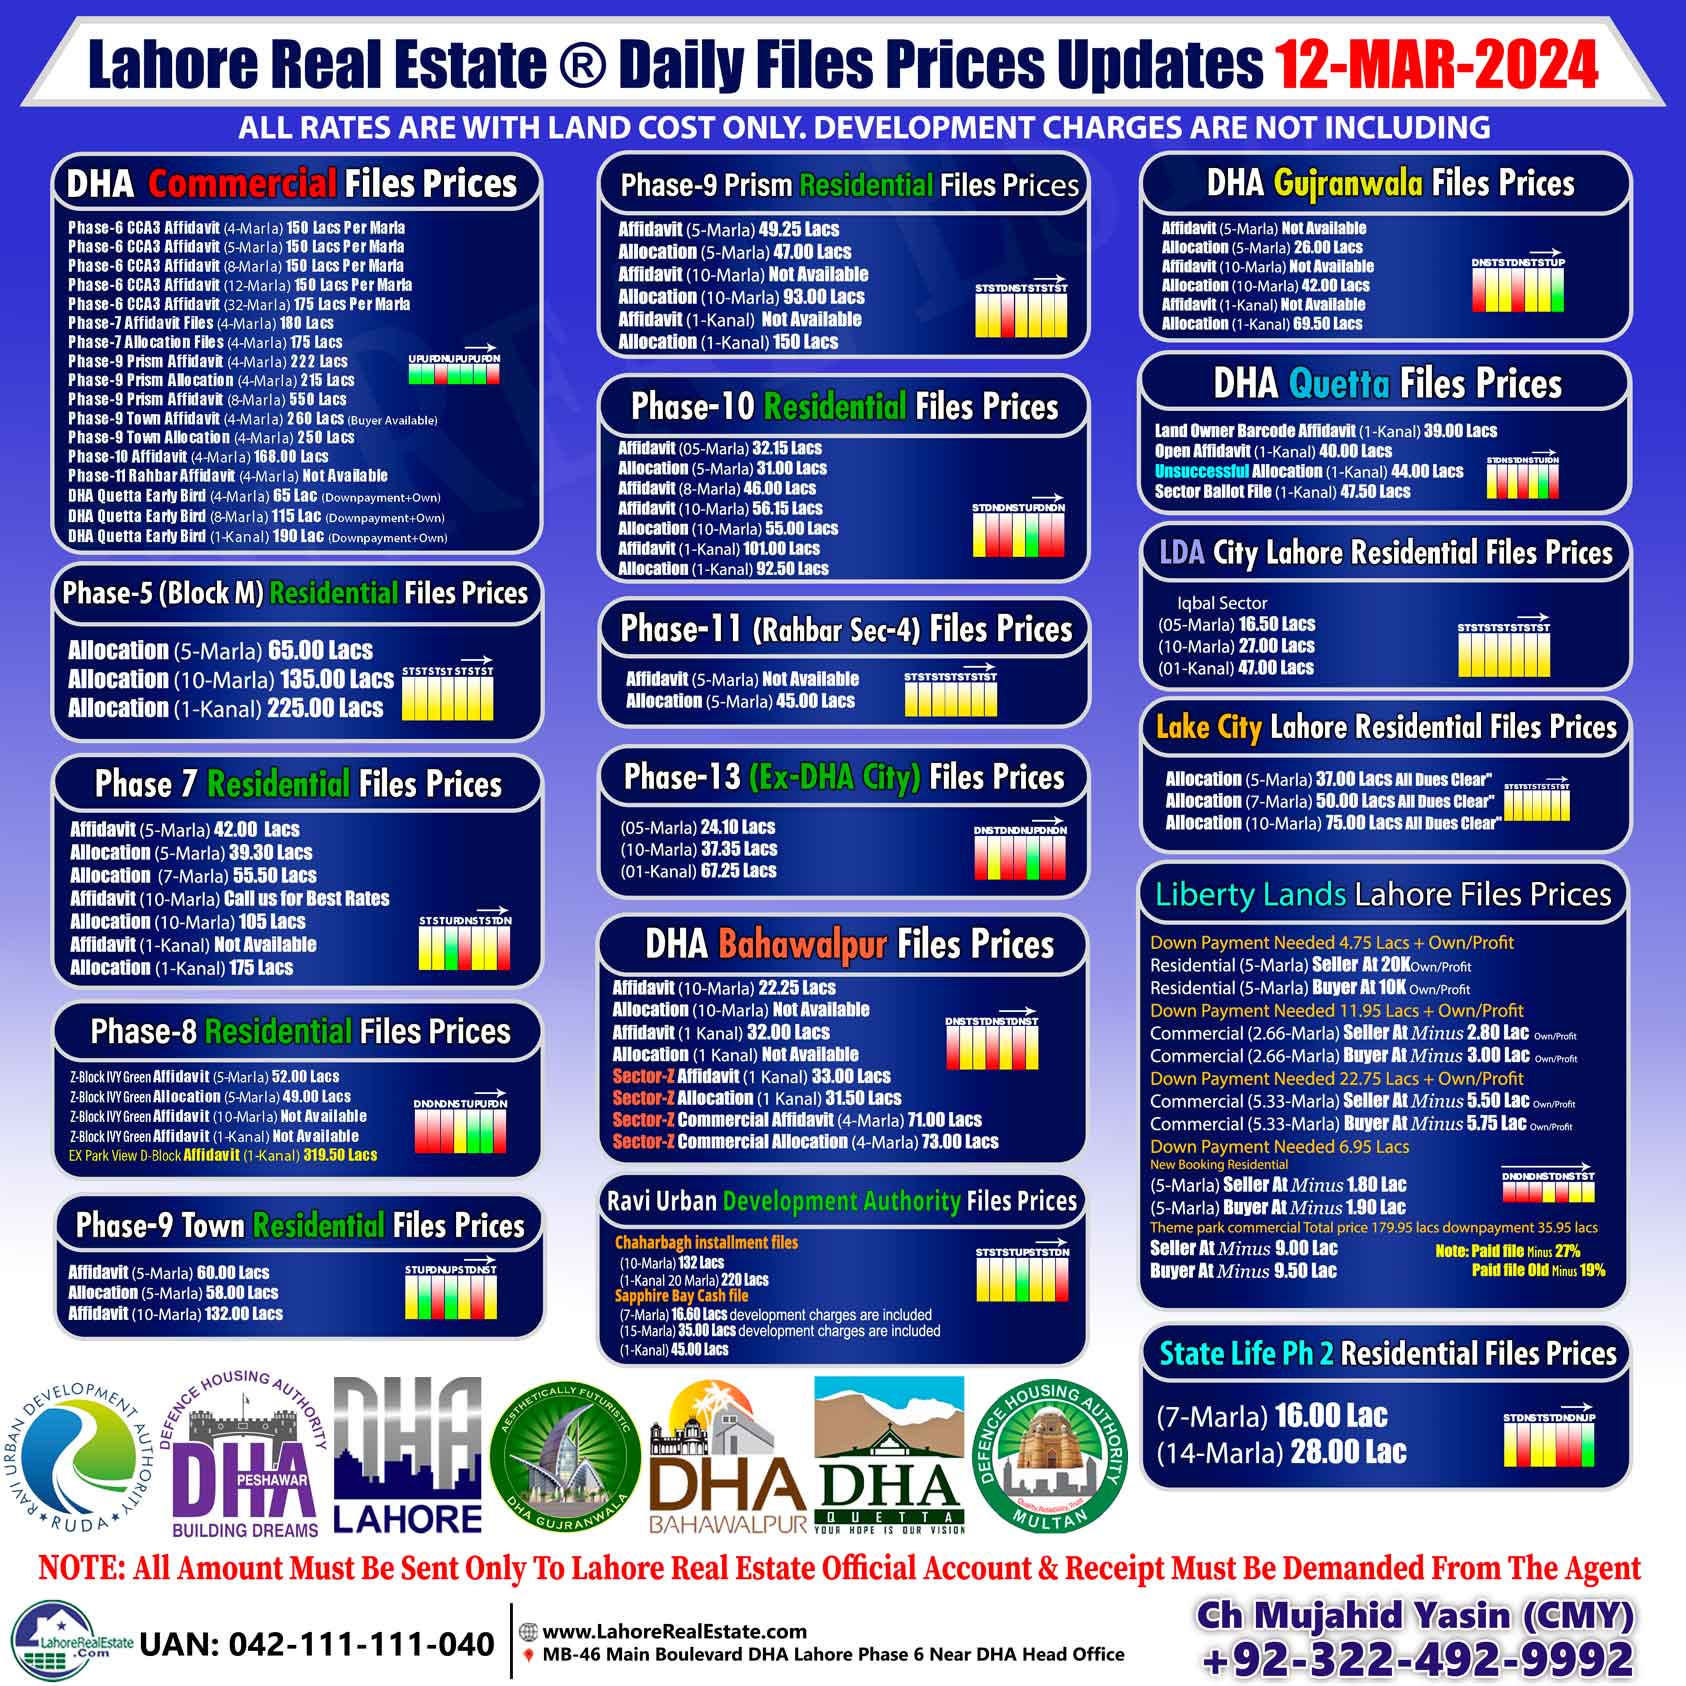 Latest Files Prices Update by Lahore Real Estate (March 12, 2024)